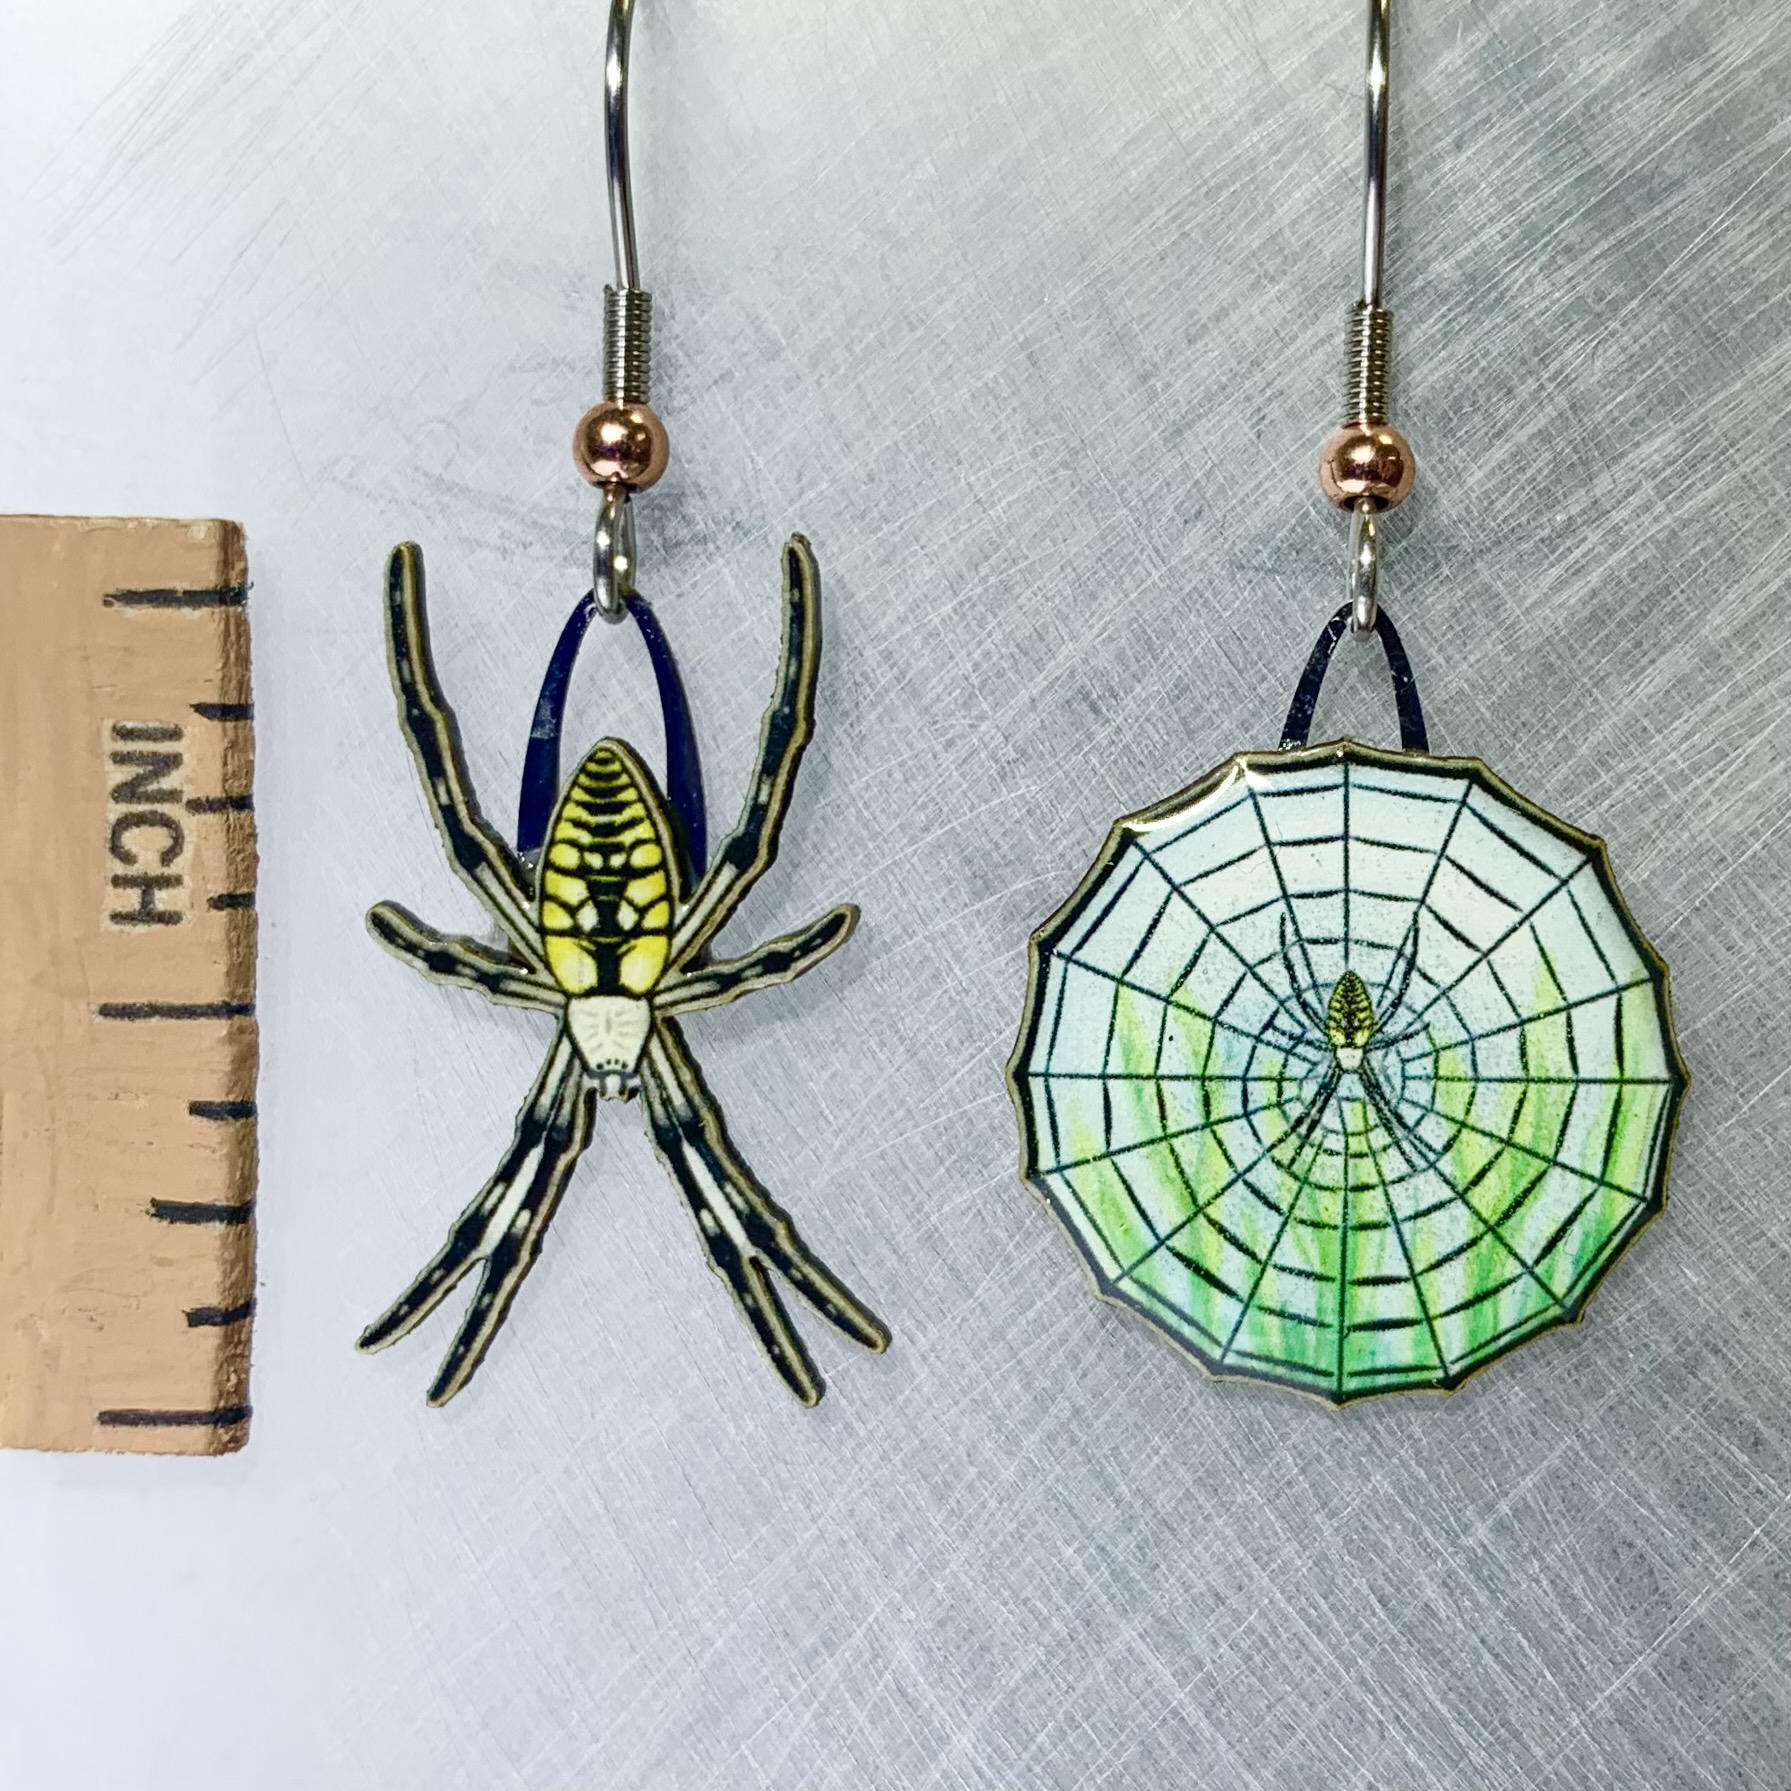 Picture shown is of 1 inch tall pair of earrings of the arachnid the Garden Spider.